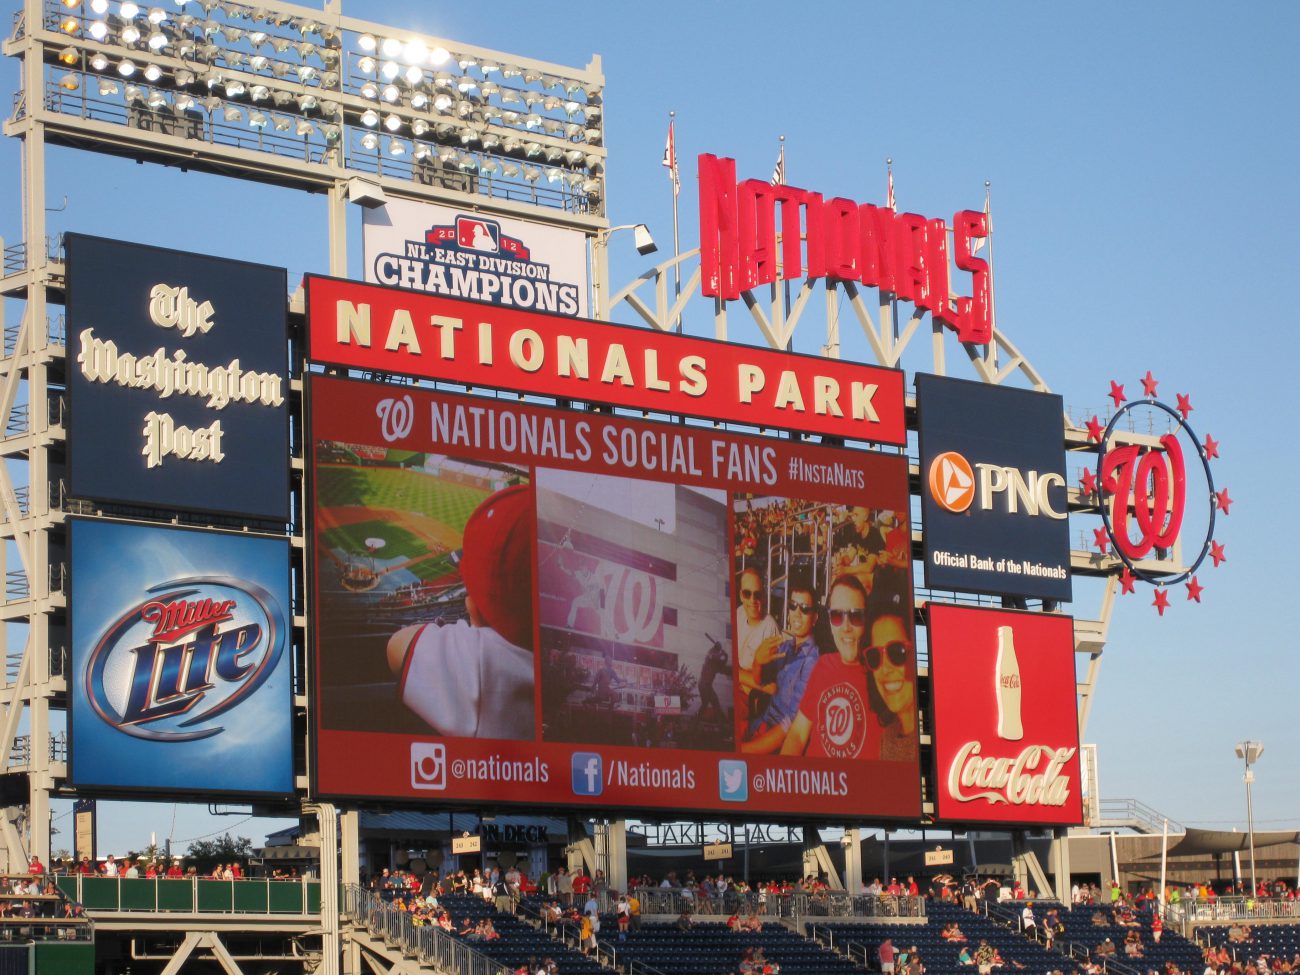 one direction nationals park seating chart